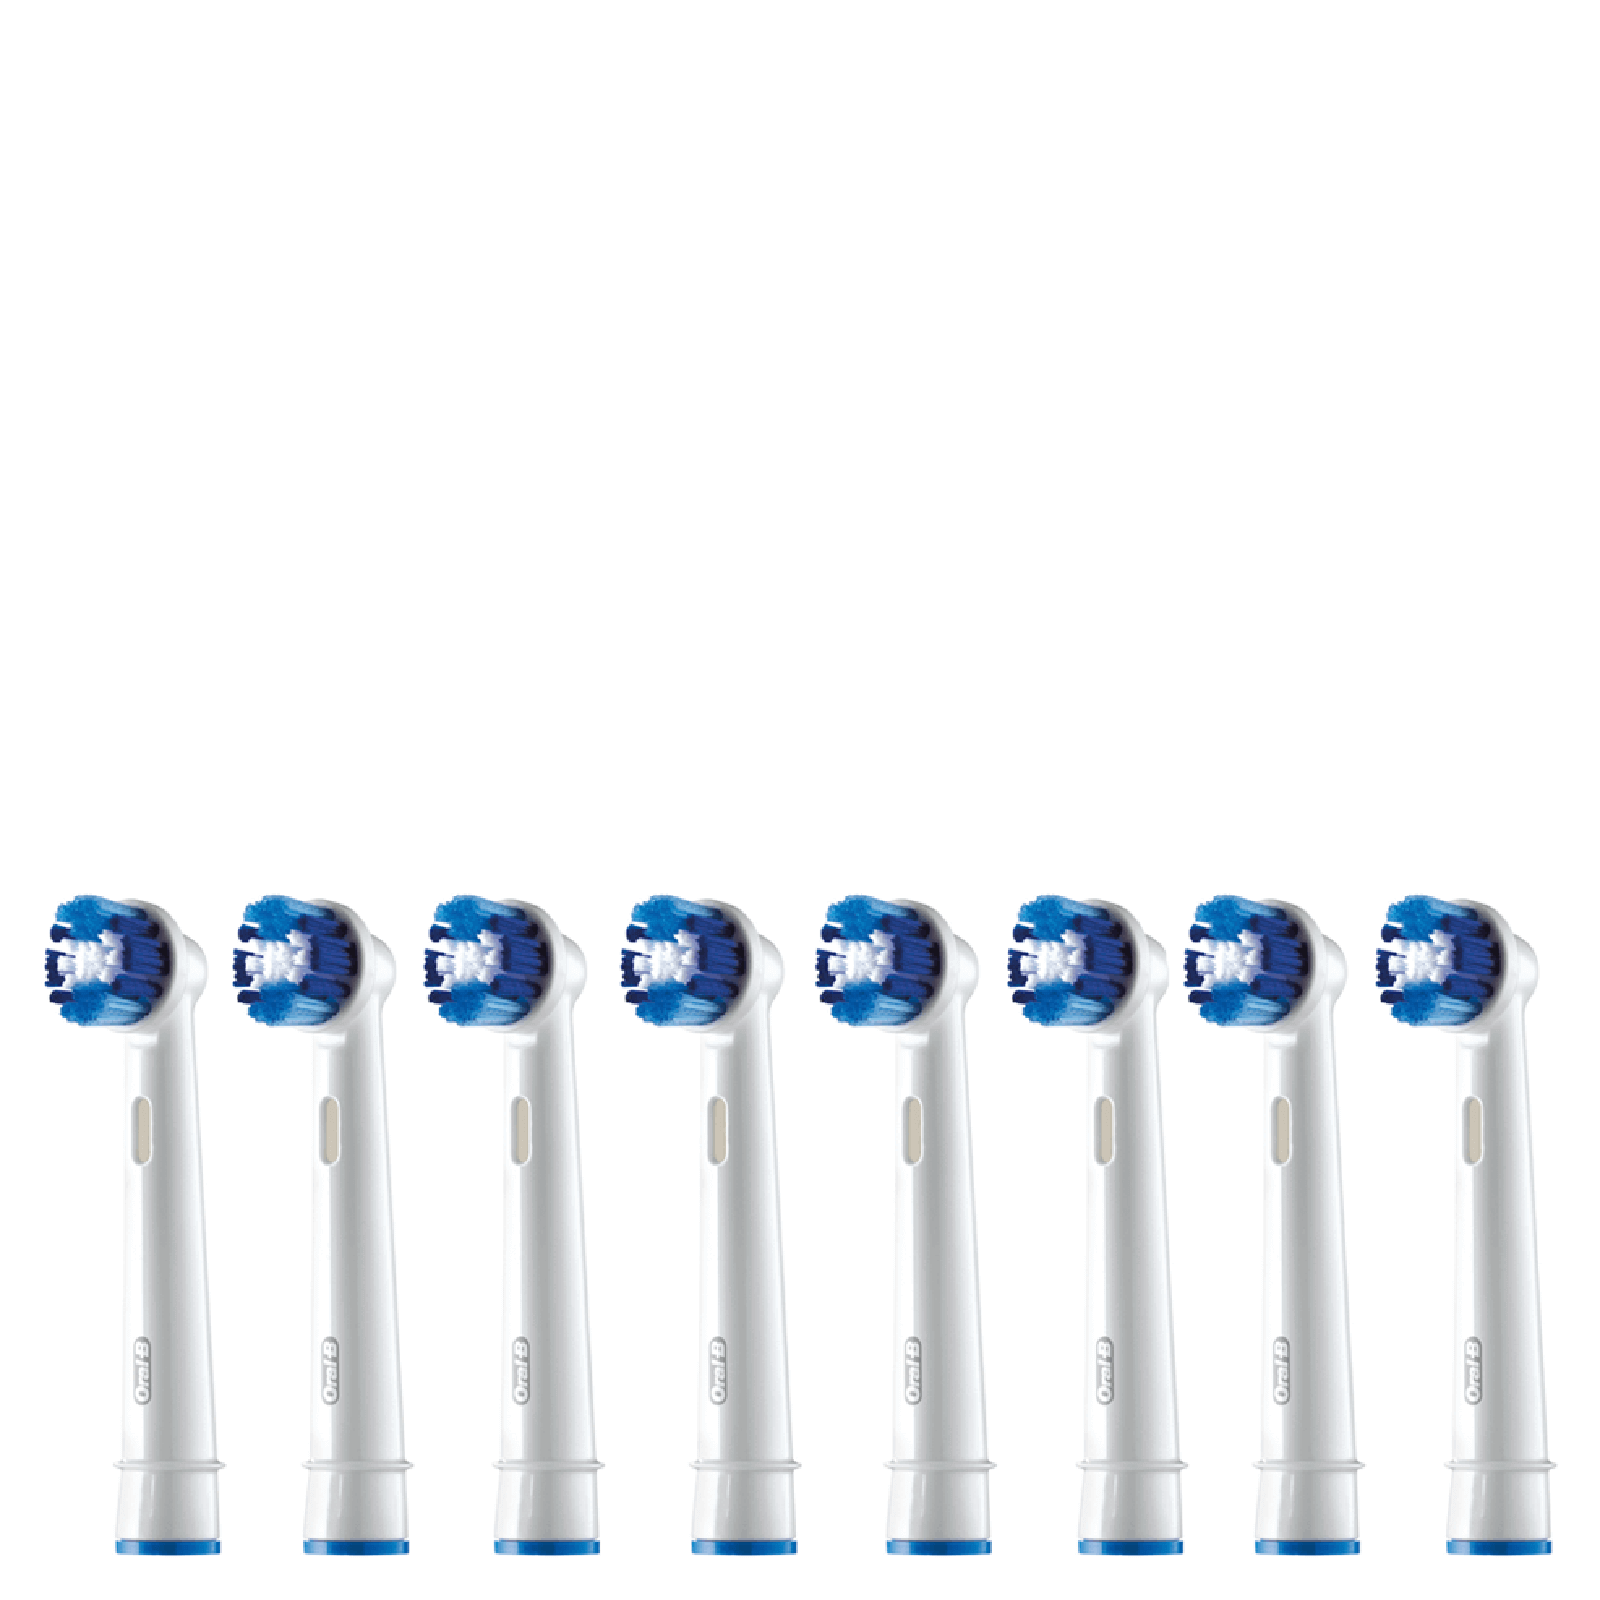 Oral-B Precision Clean Replacement Toothbrush Heads (8 Pack)